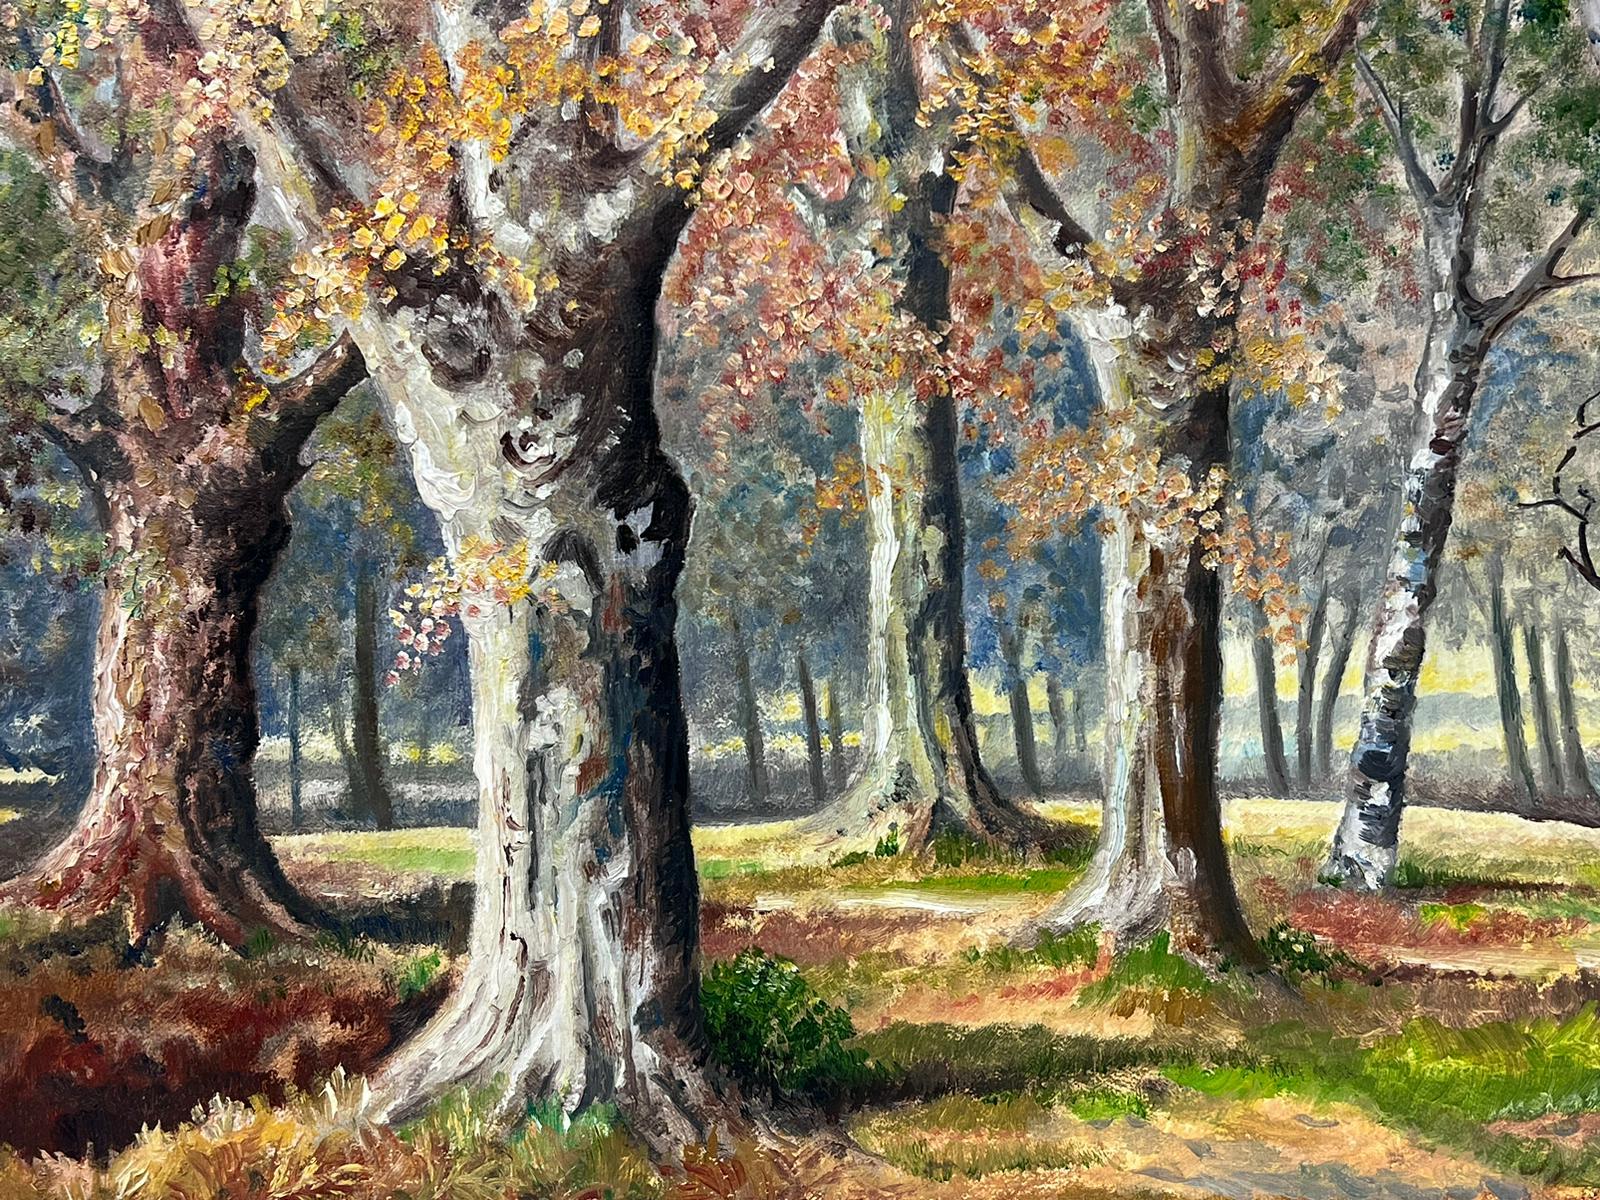 Autumn Forest
N.Hansford, British 1978
signed oil painting on board, framed
inscribed verso
framed: 21 x 25 inches
board: 19 x 23 inches
provenance: private collection, UK
condition: very good and sound condition